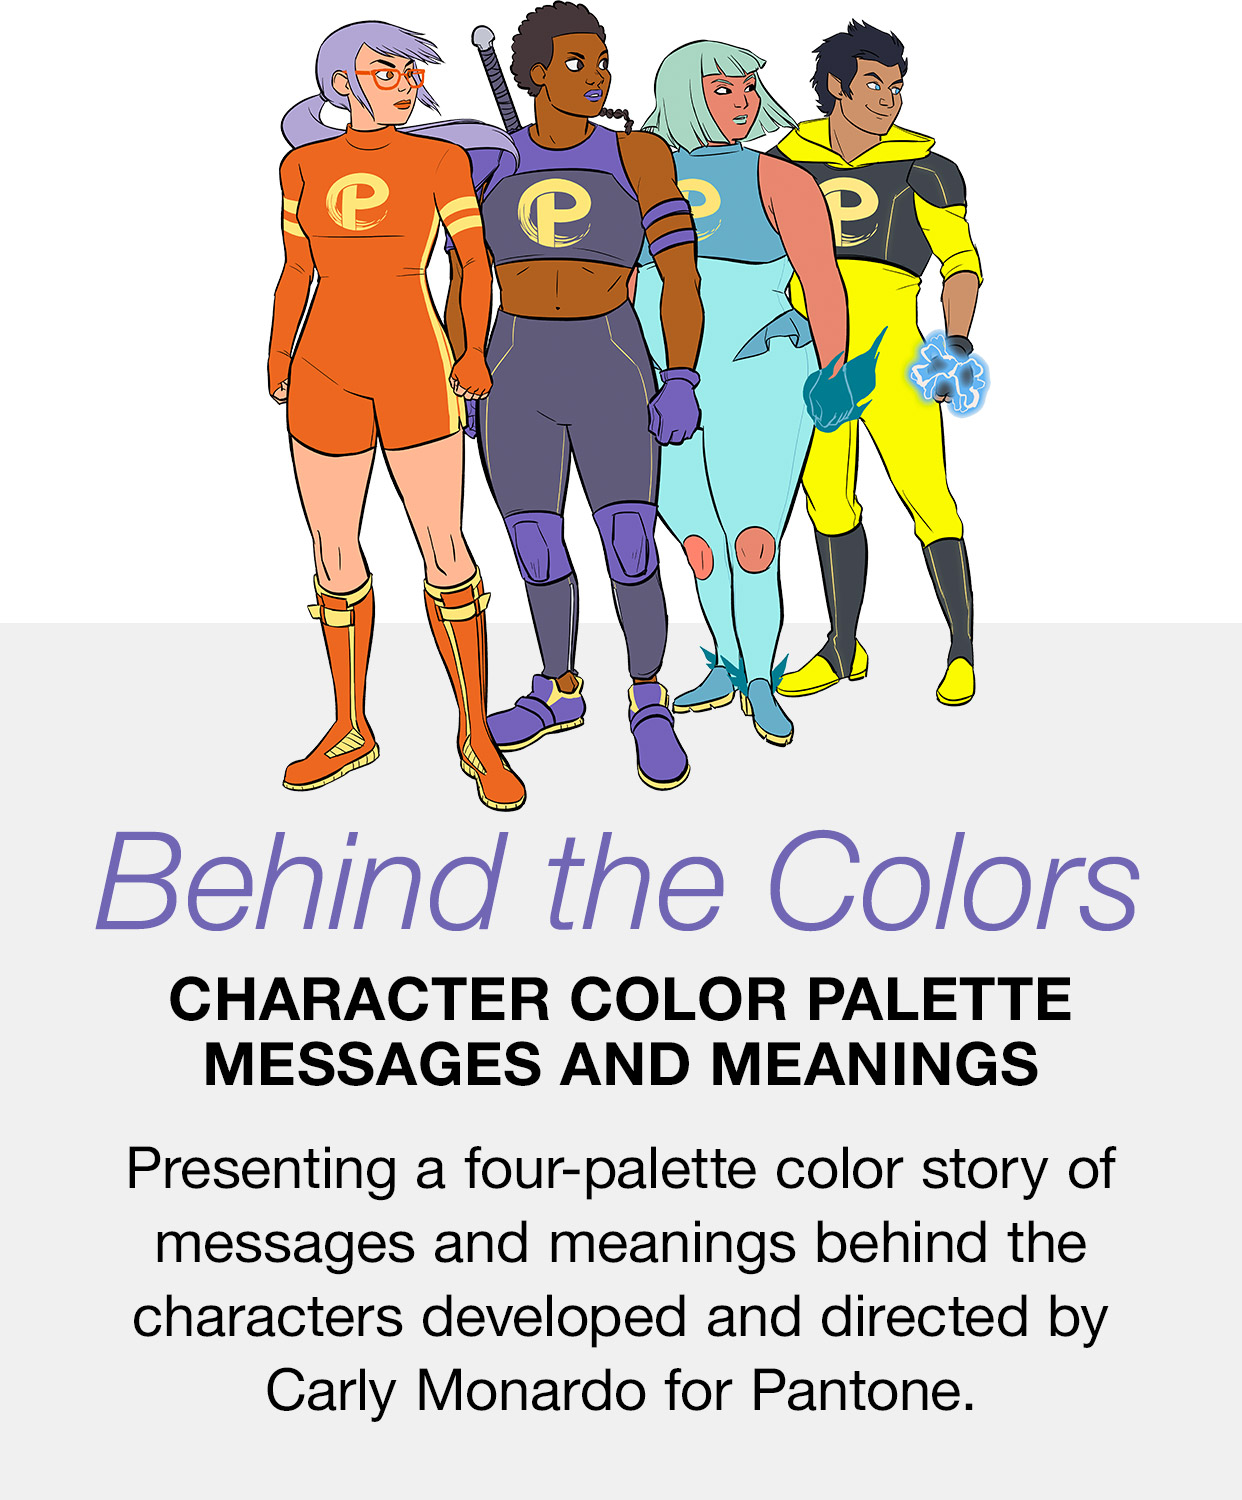 Behind the Colors - Character Color Palette Messages and Meanings